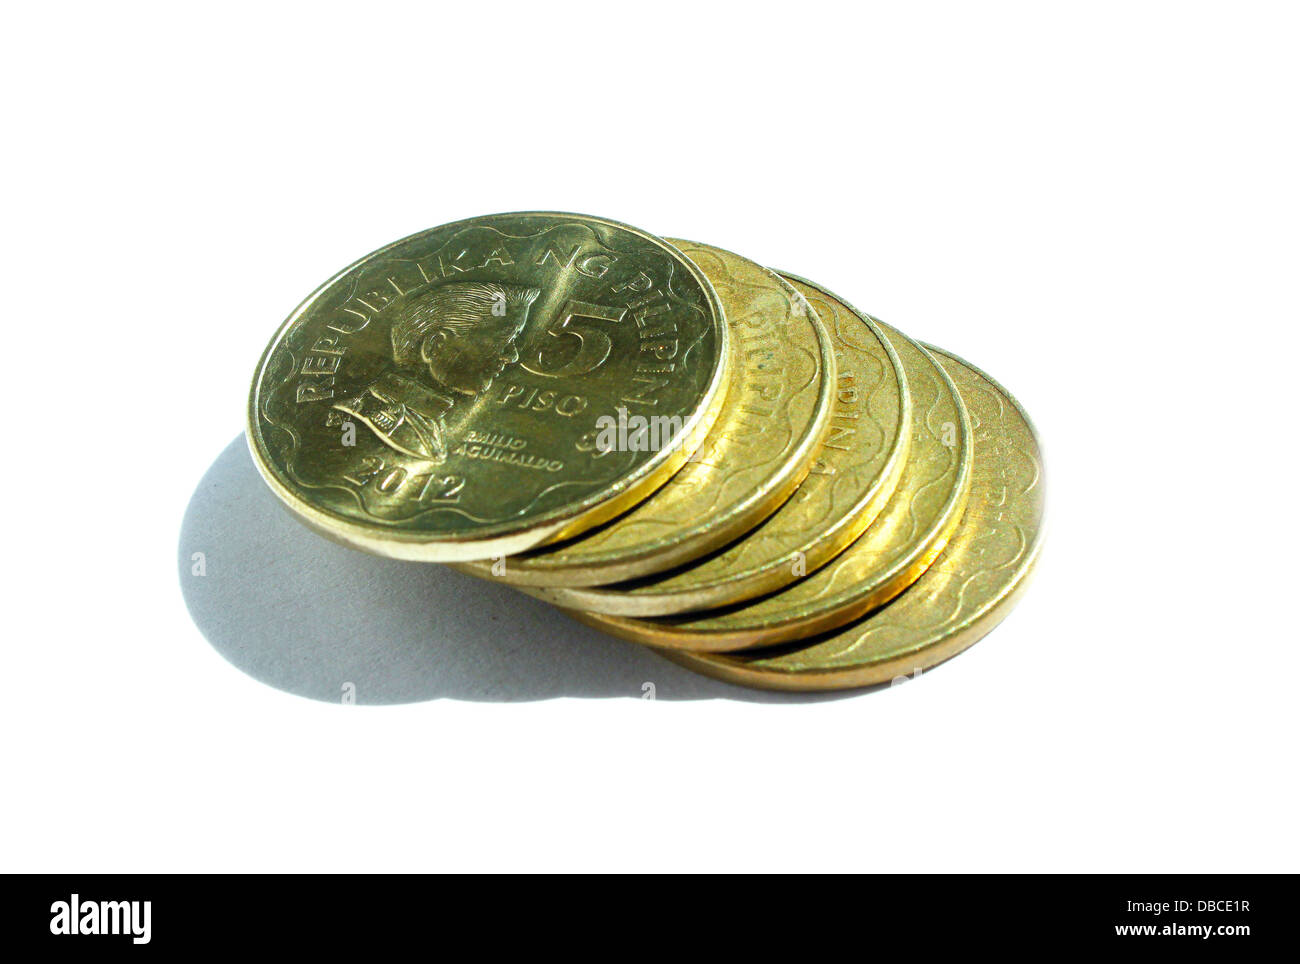 5 peso coins of the Philippines Stock Photo